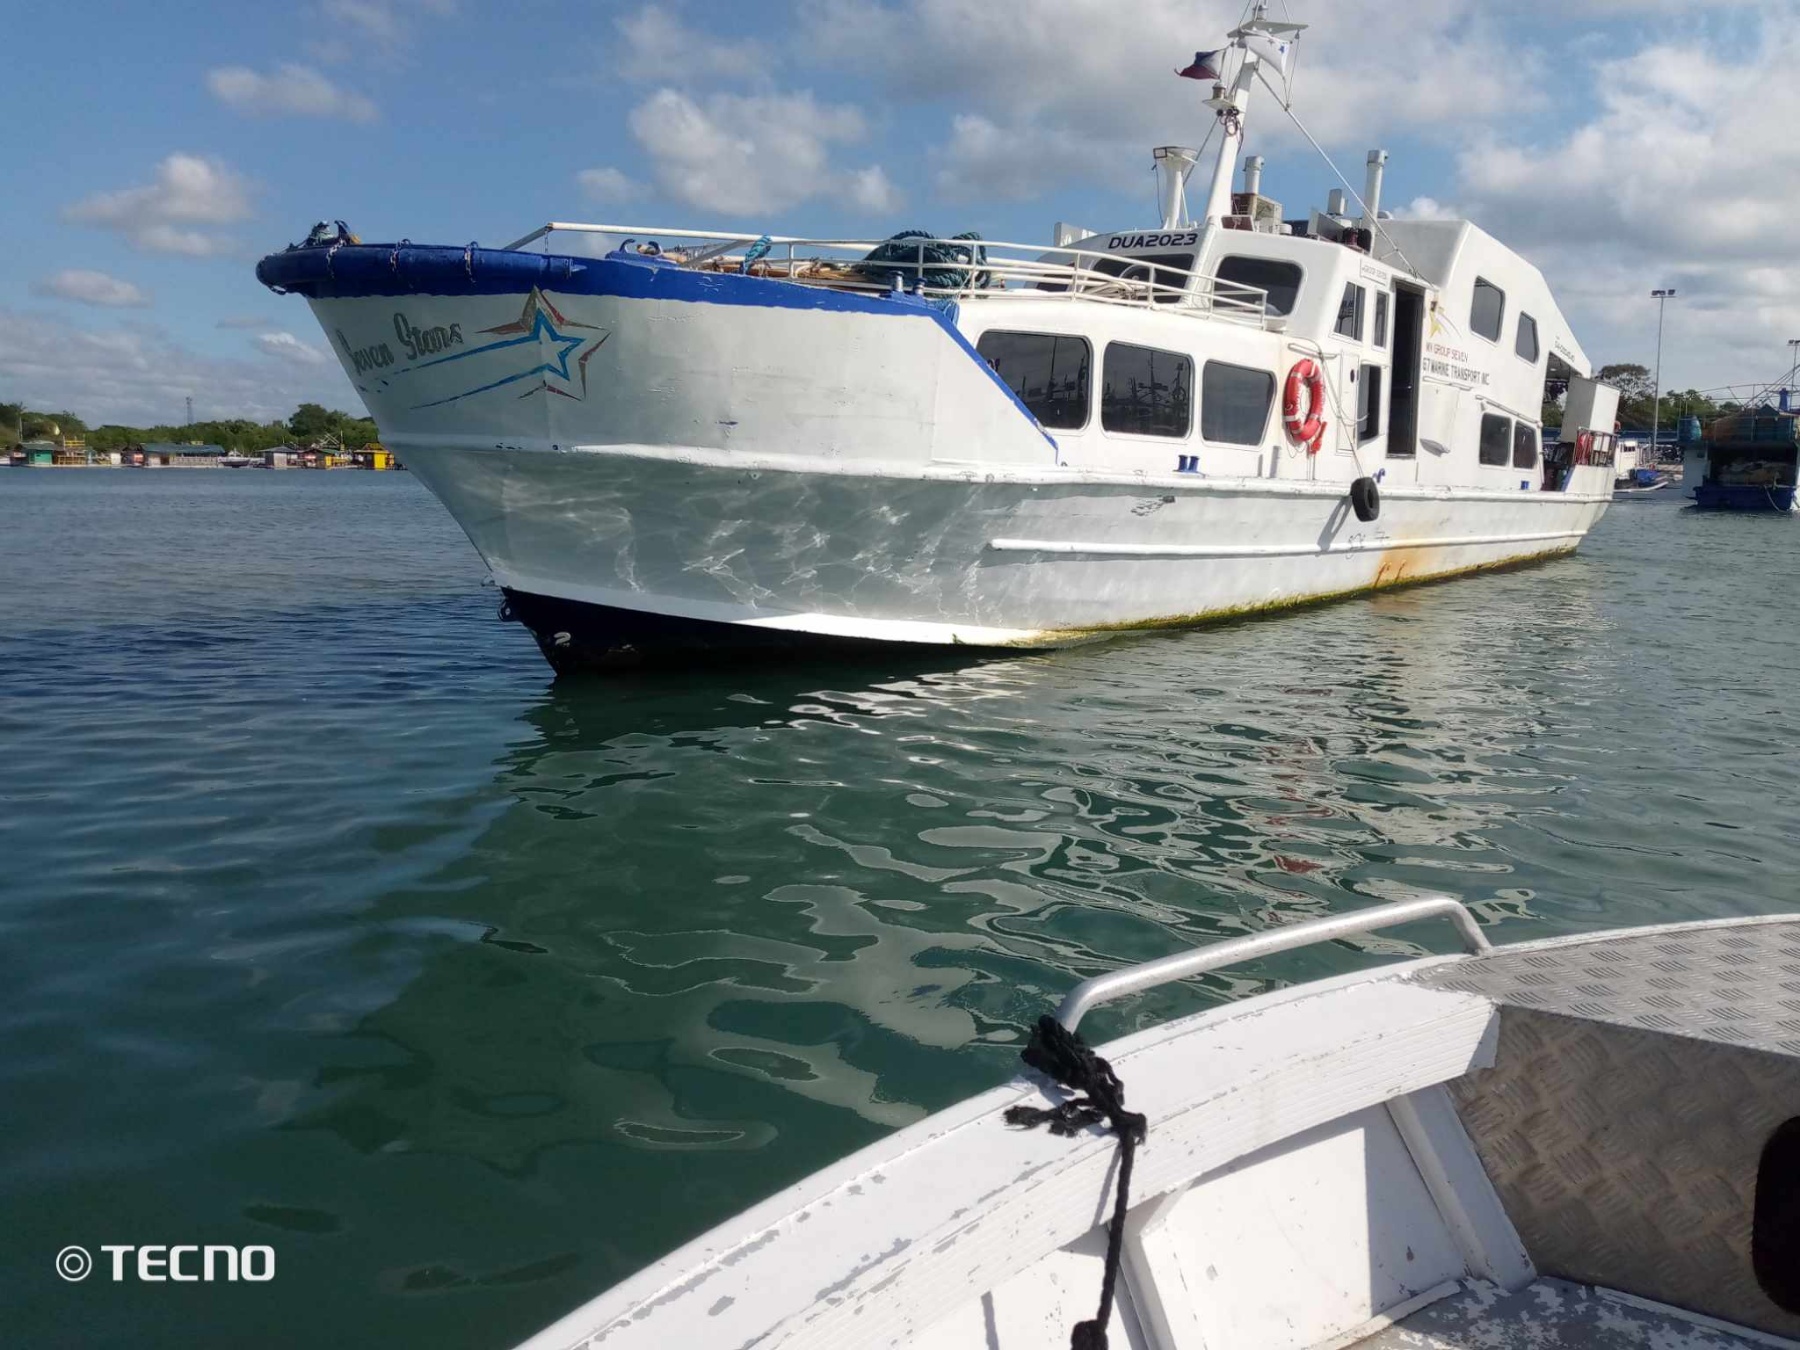  All eight crew members on board a vessel that ran aground off Calatagan, Batangas, on Friday are safe and in good physical condition, the Philippine Coast Guard (PCG) Southern Tagalog said.